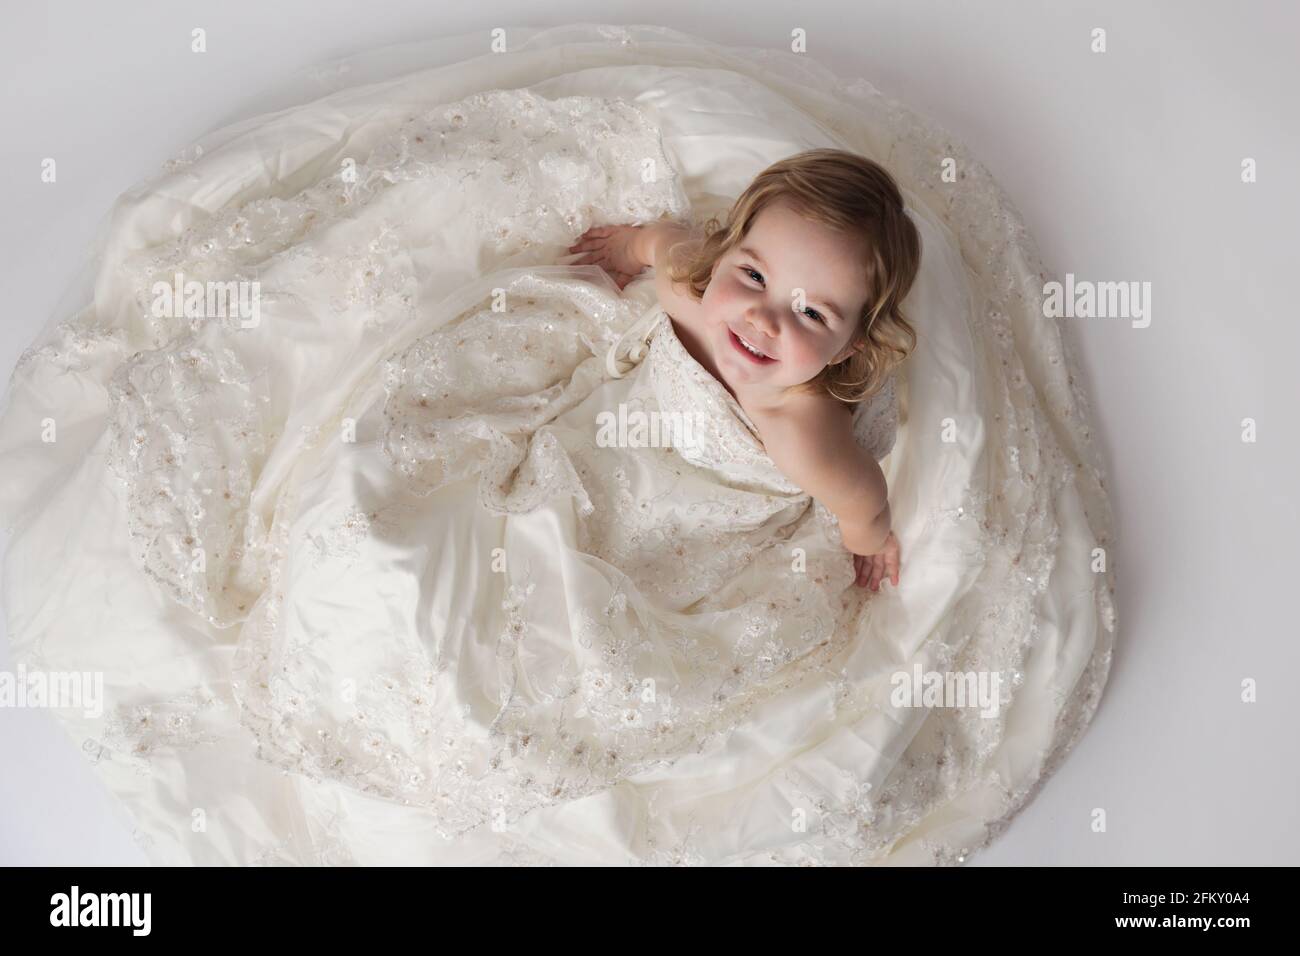 Toddler girl looks up and smiles while wearing mother's wedding gown Stock Photo